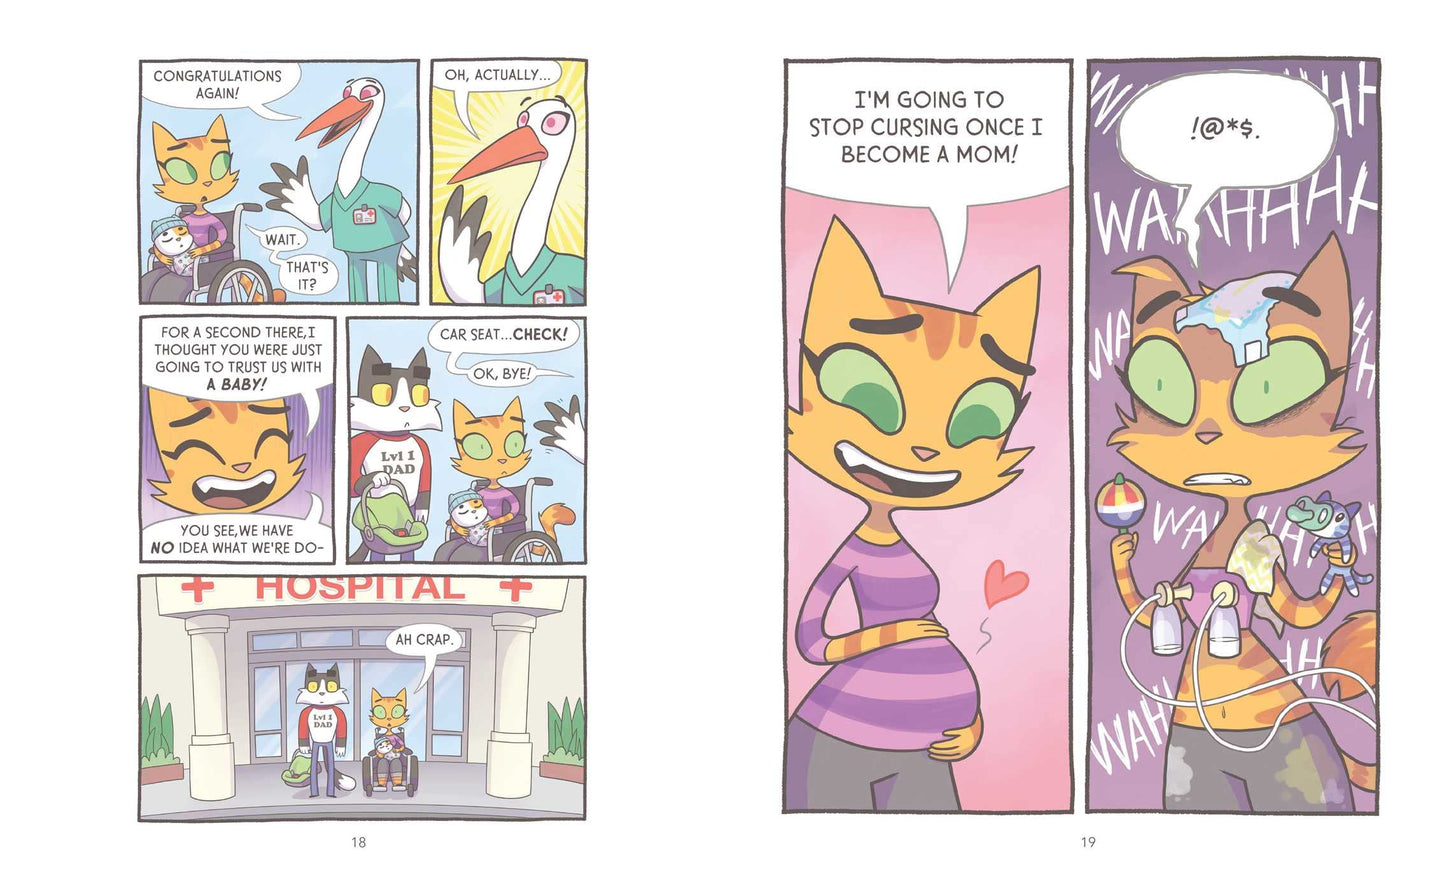 Signed "Parenting is Weird: Tails from the Litterbox" Book